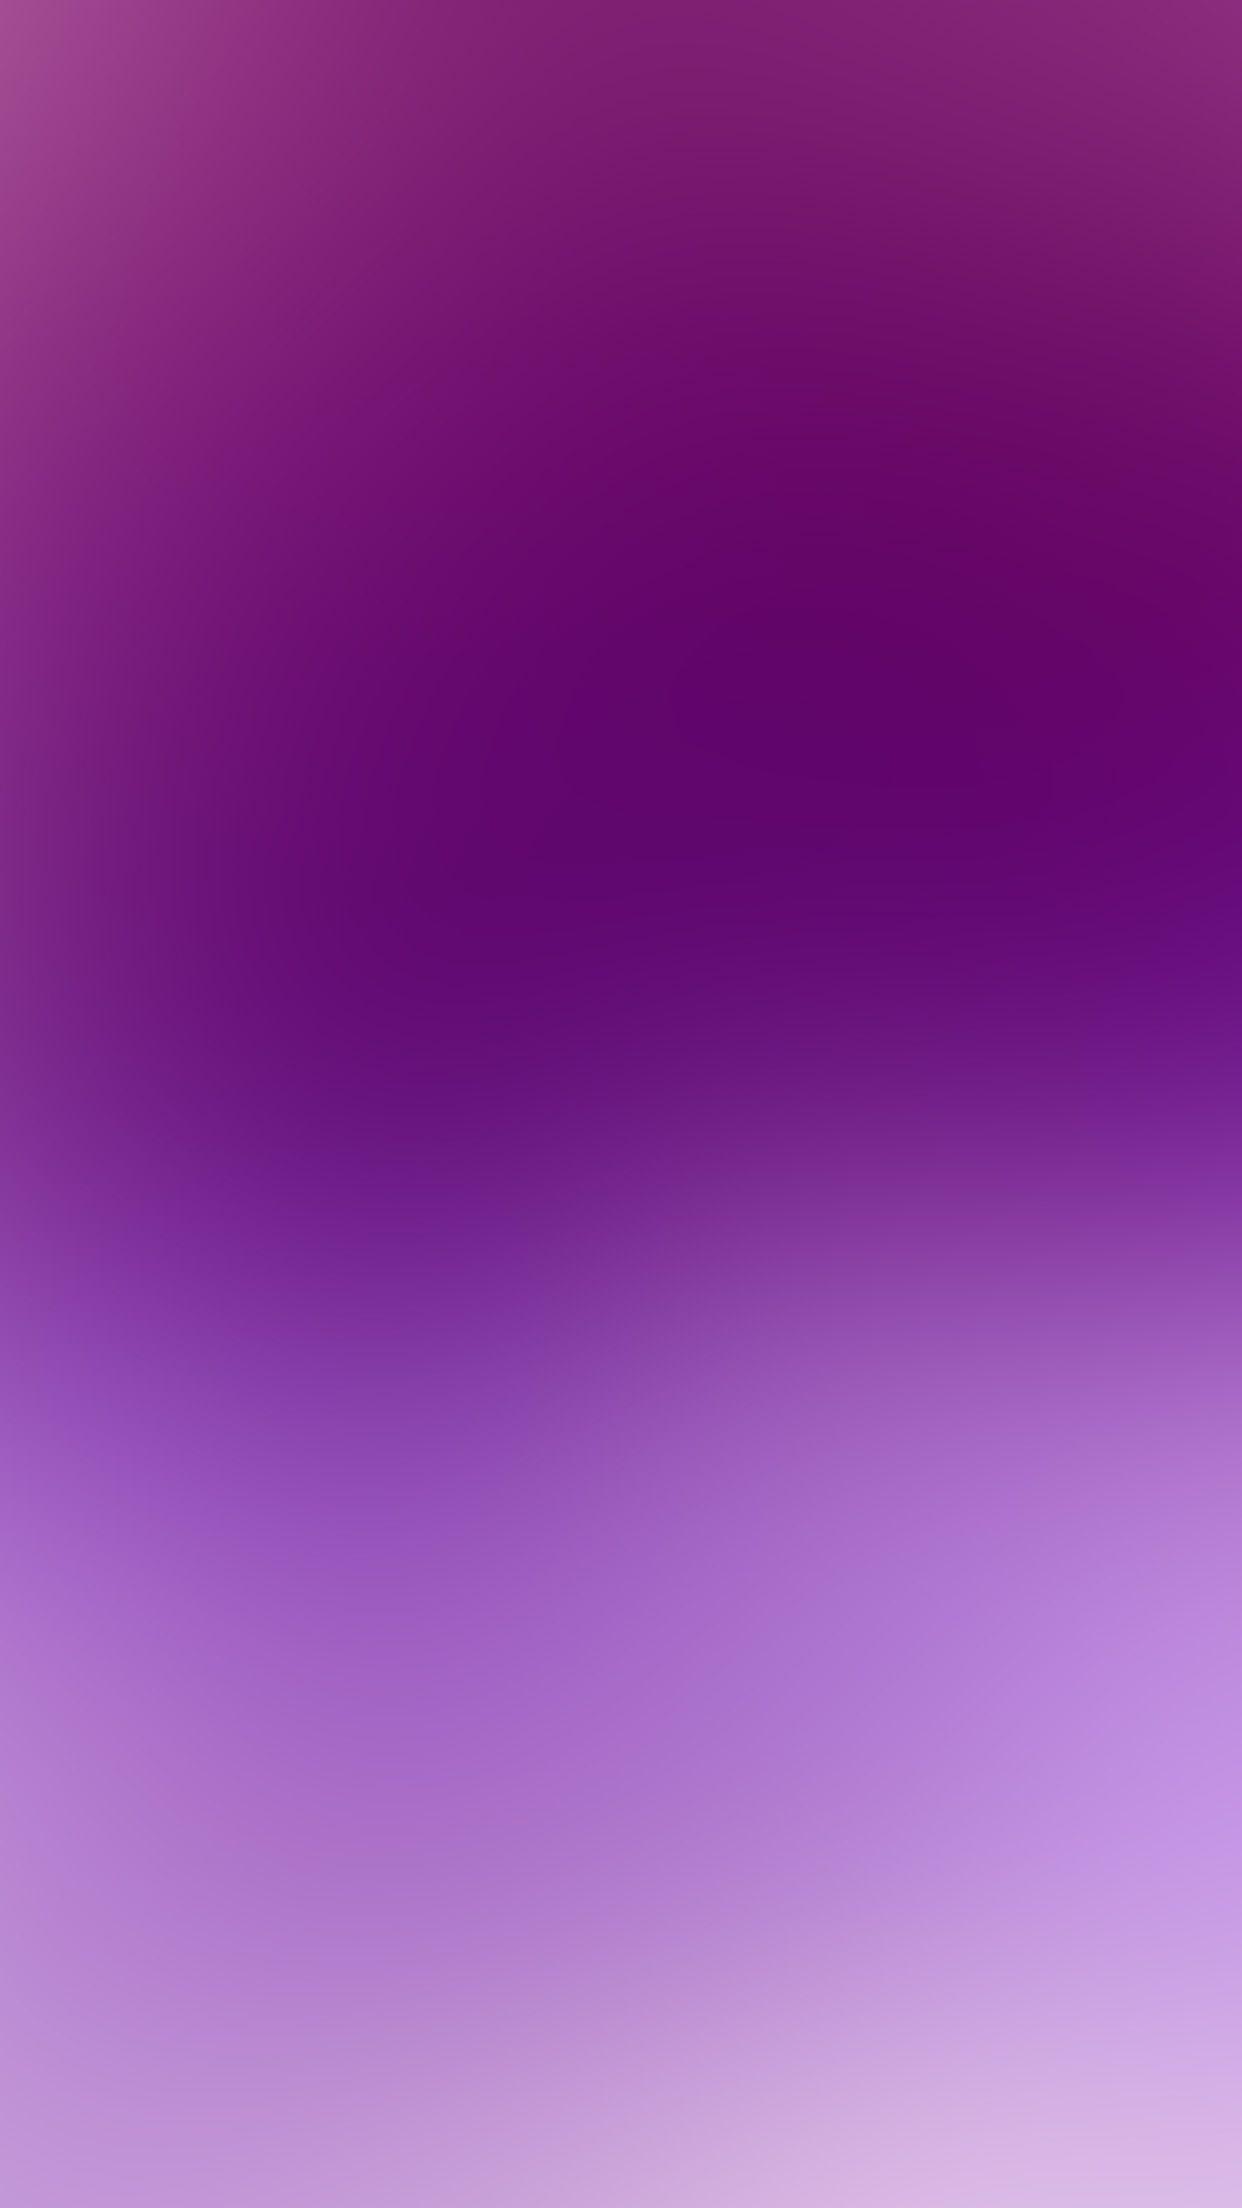 Dust In Purple Light Artistic iPhone Wallpapers Free Download